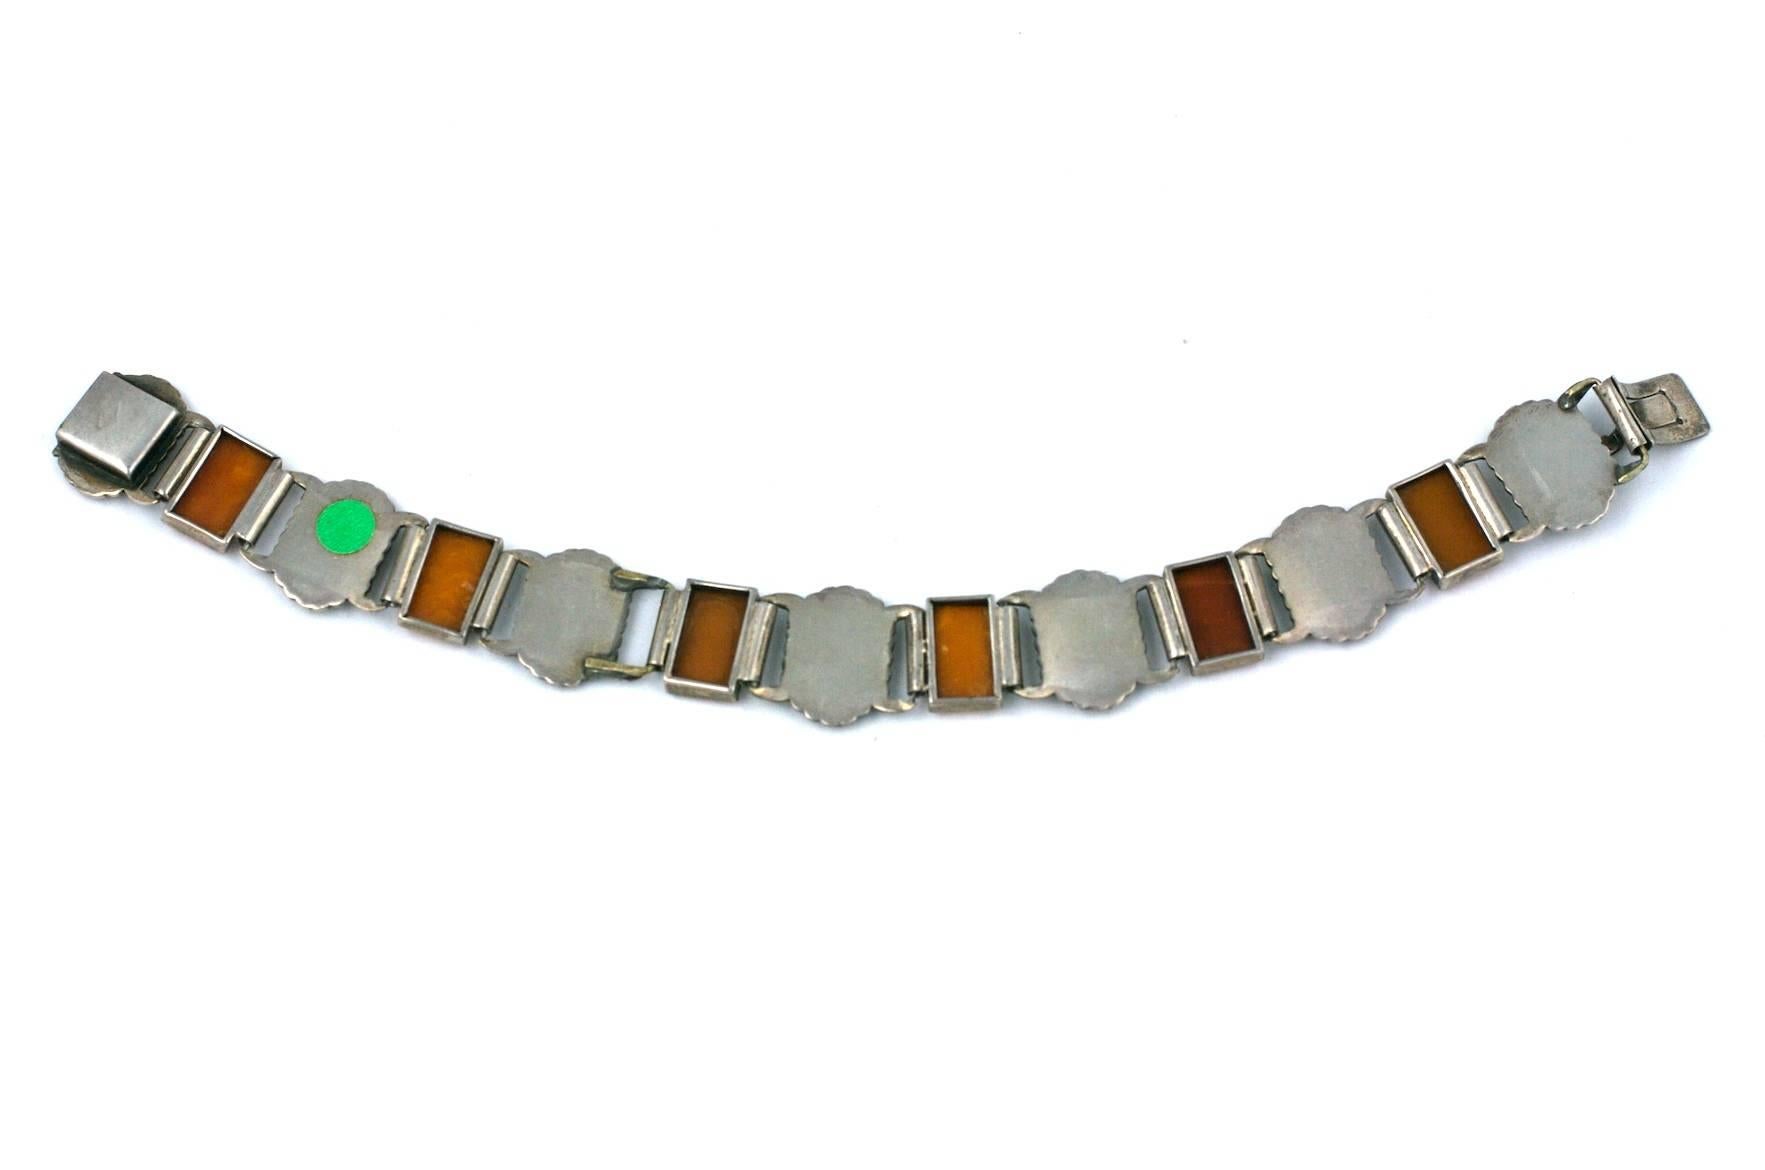 Unusual German Art Deco genuine amber and enamel link bracelet from the 1930's.
Matte lime green enamel contrasts beautifully against the rectangular cut amber stones.
1930's Germany set in 800 grade silver. Excellent condition. 
7